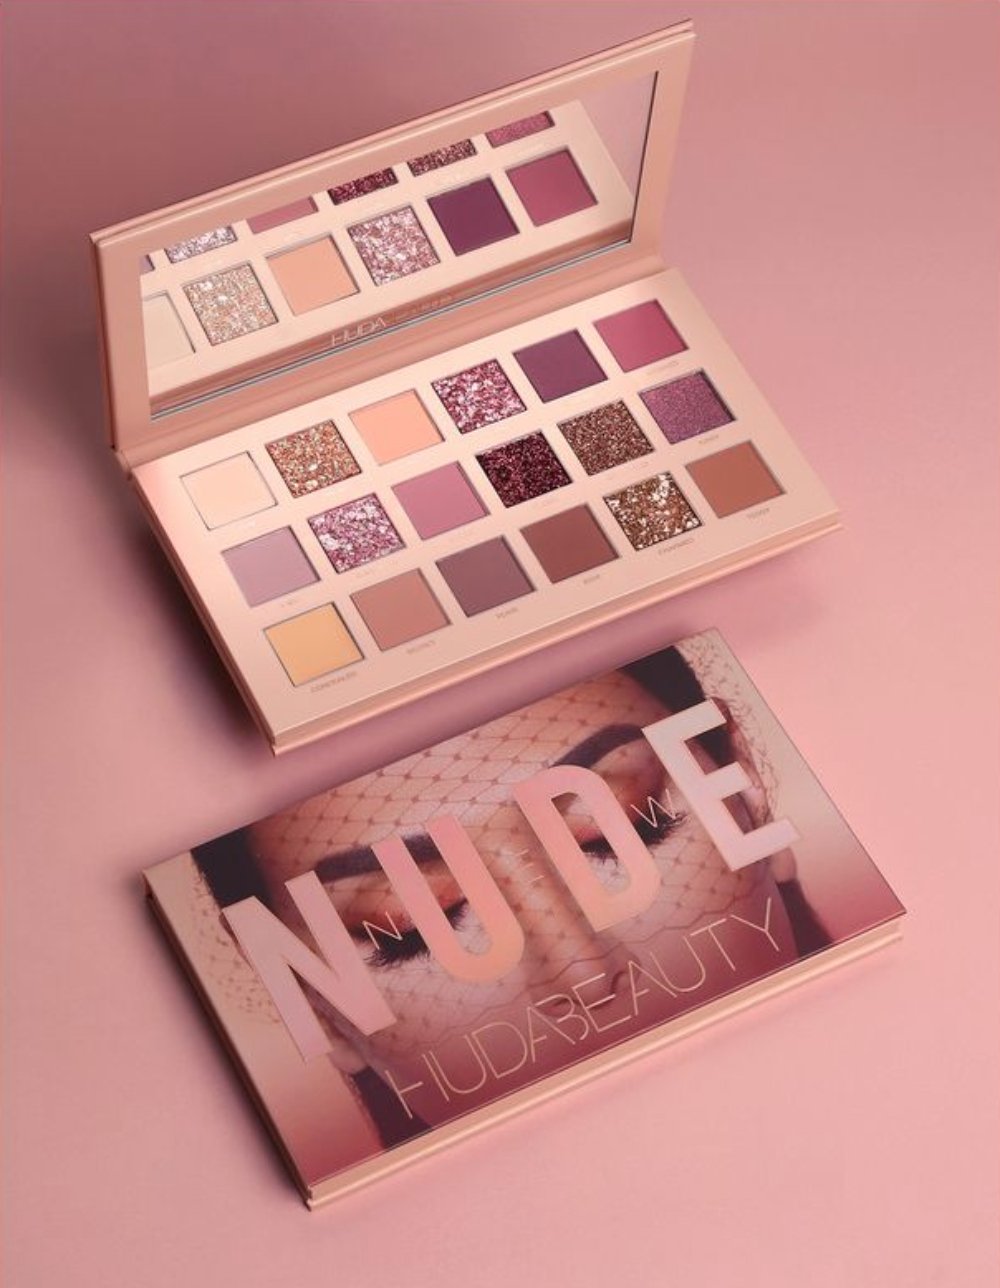 Huda Beauty Sand Haze Obsessions Palette - The Face Method